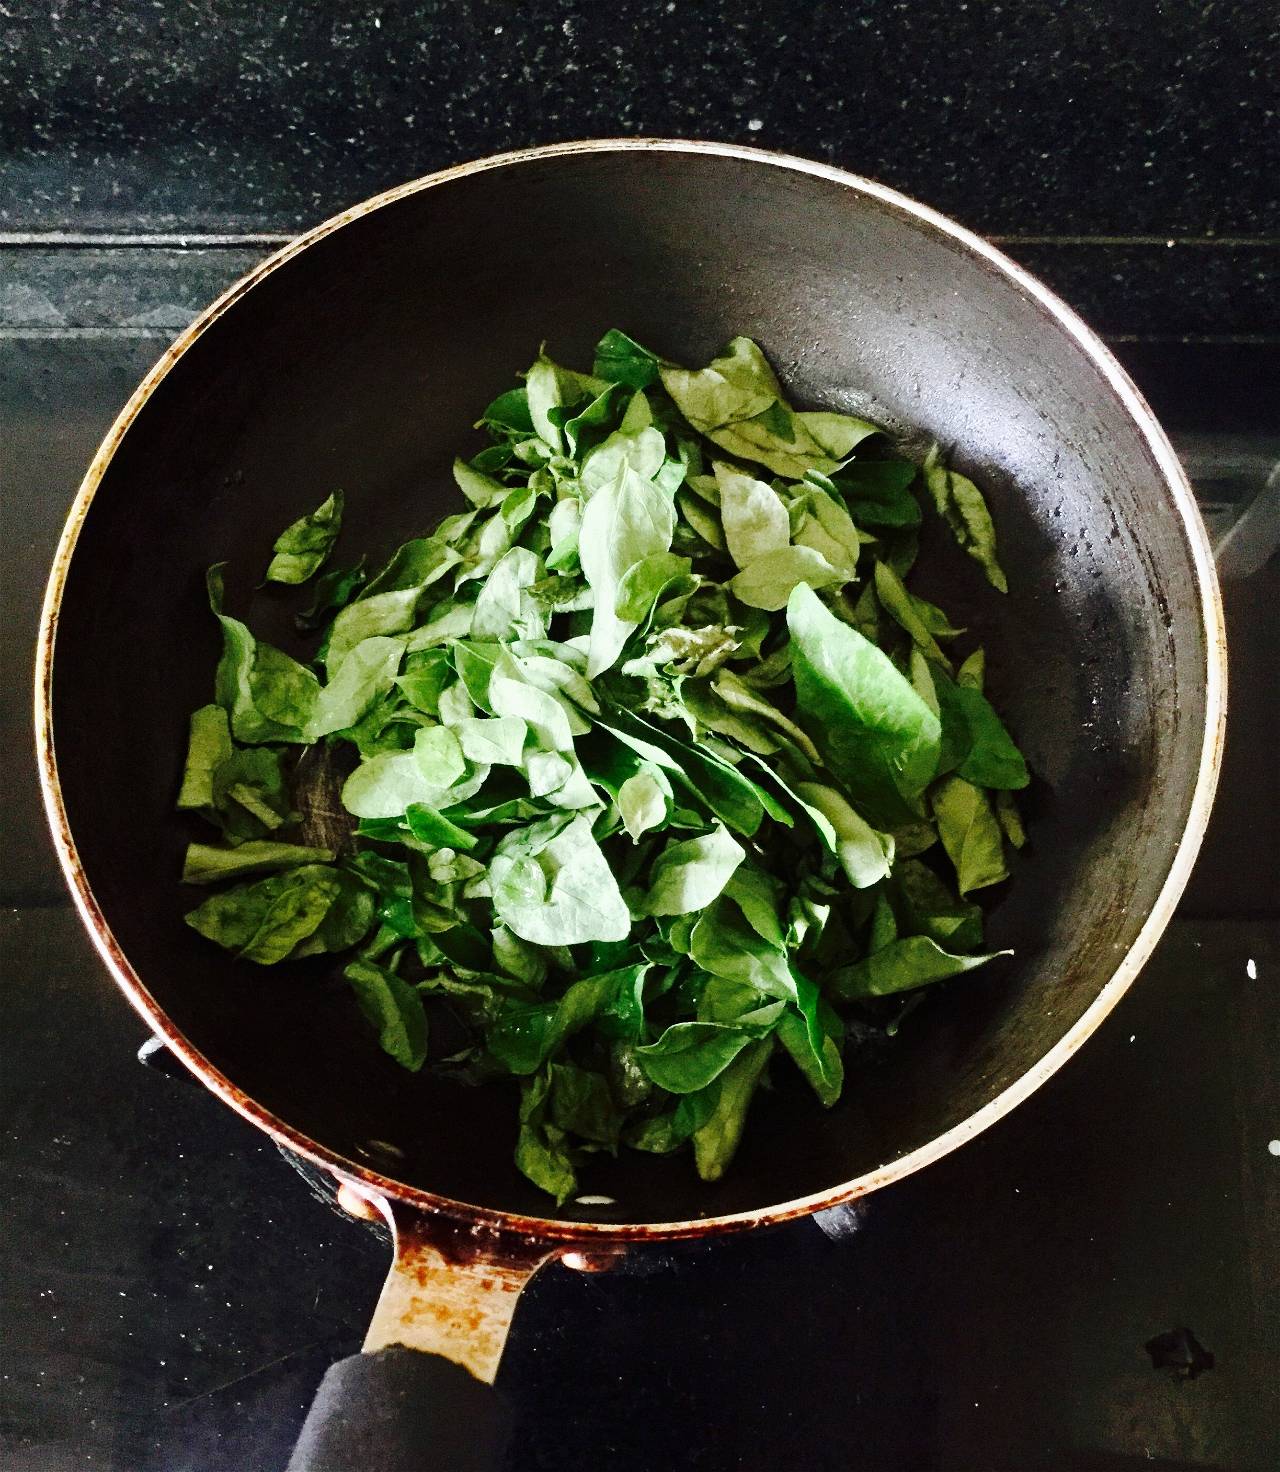 Curry leaves in the pan